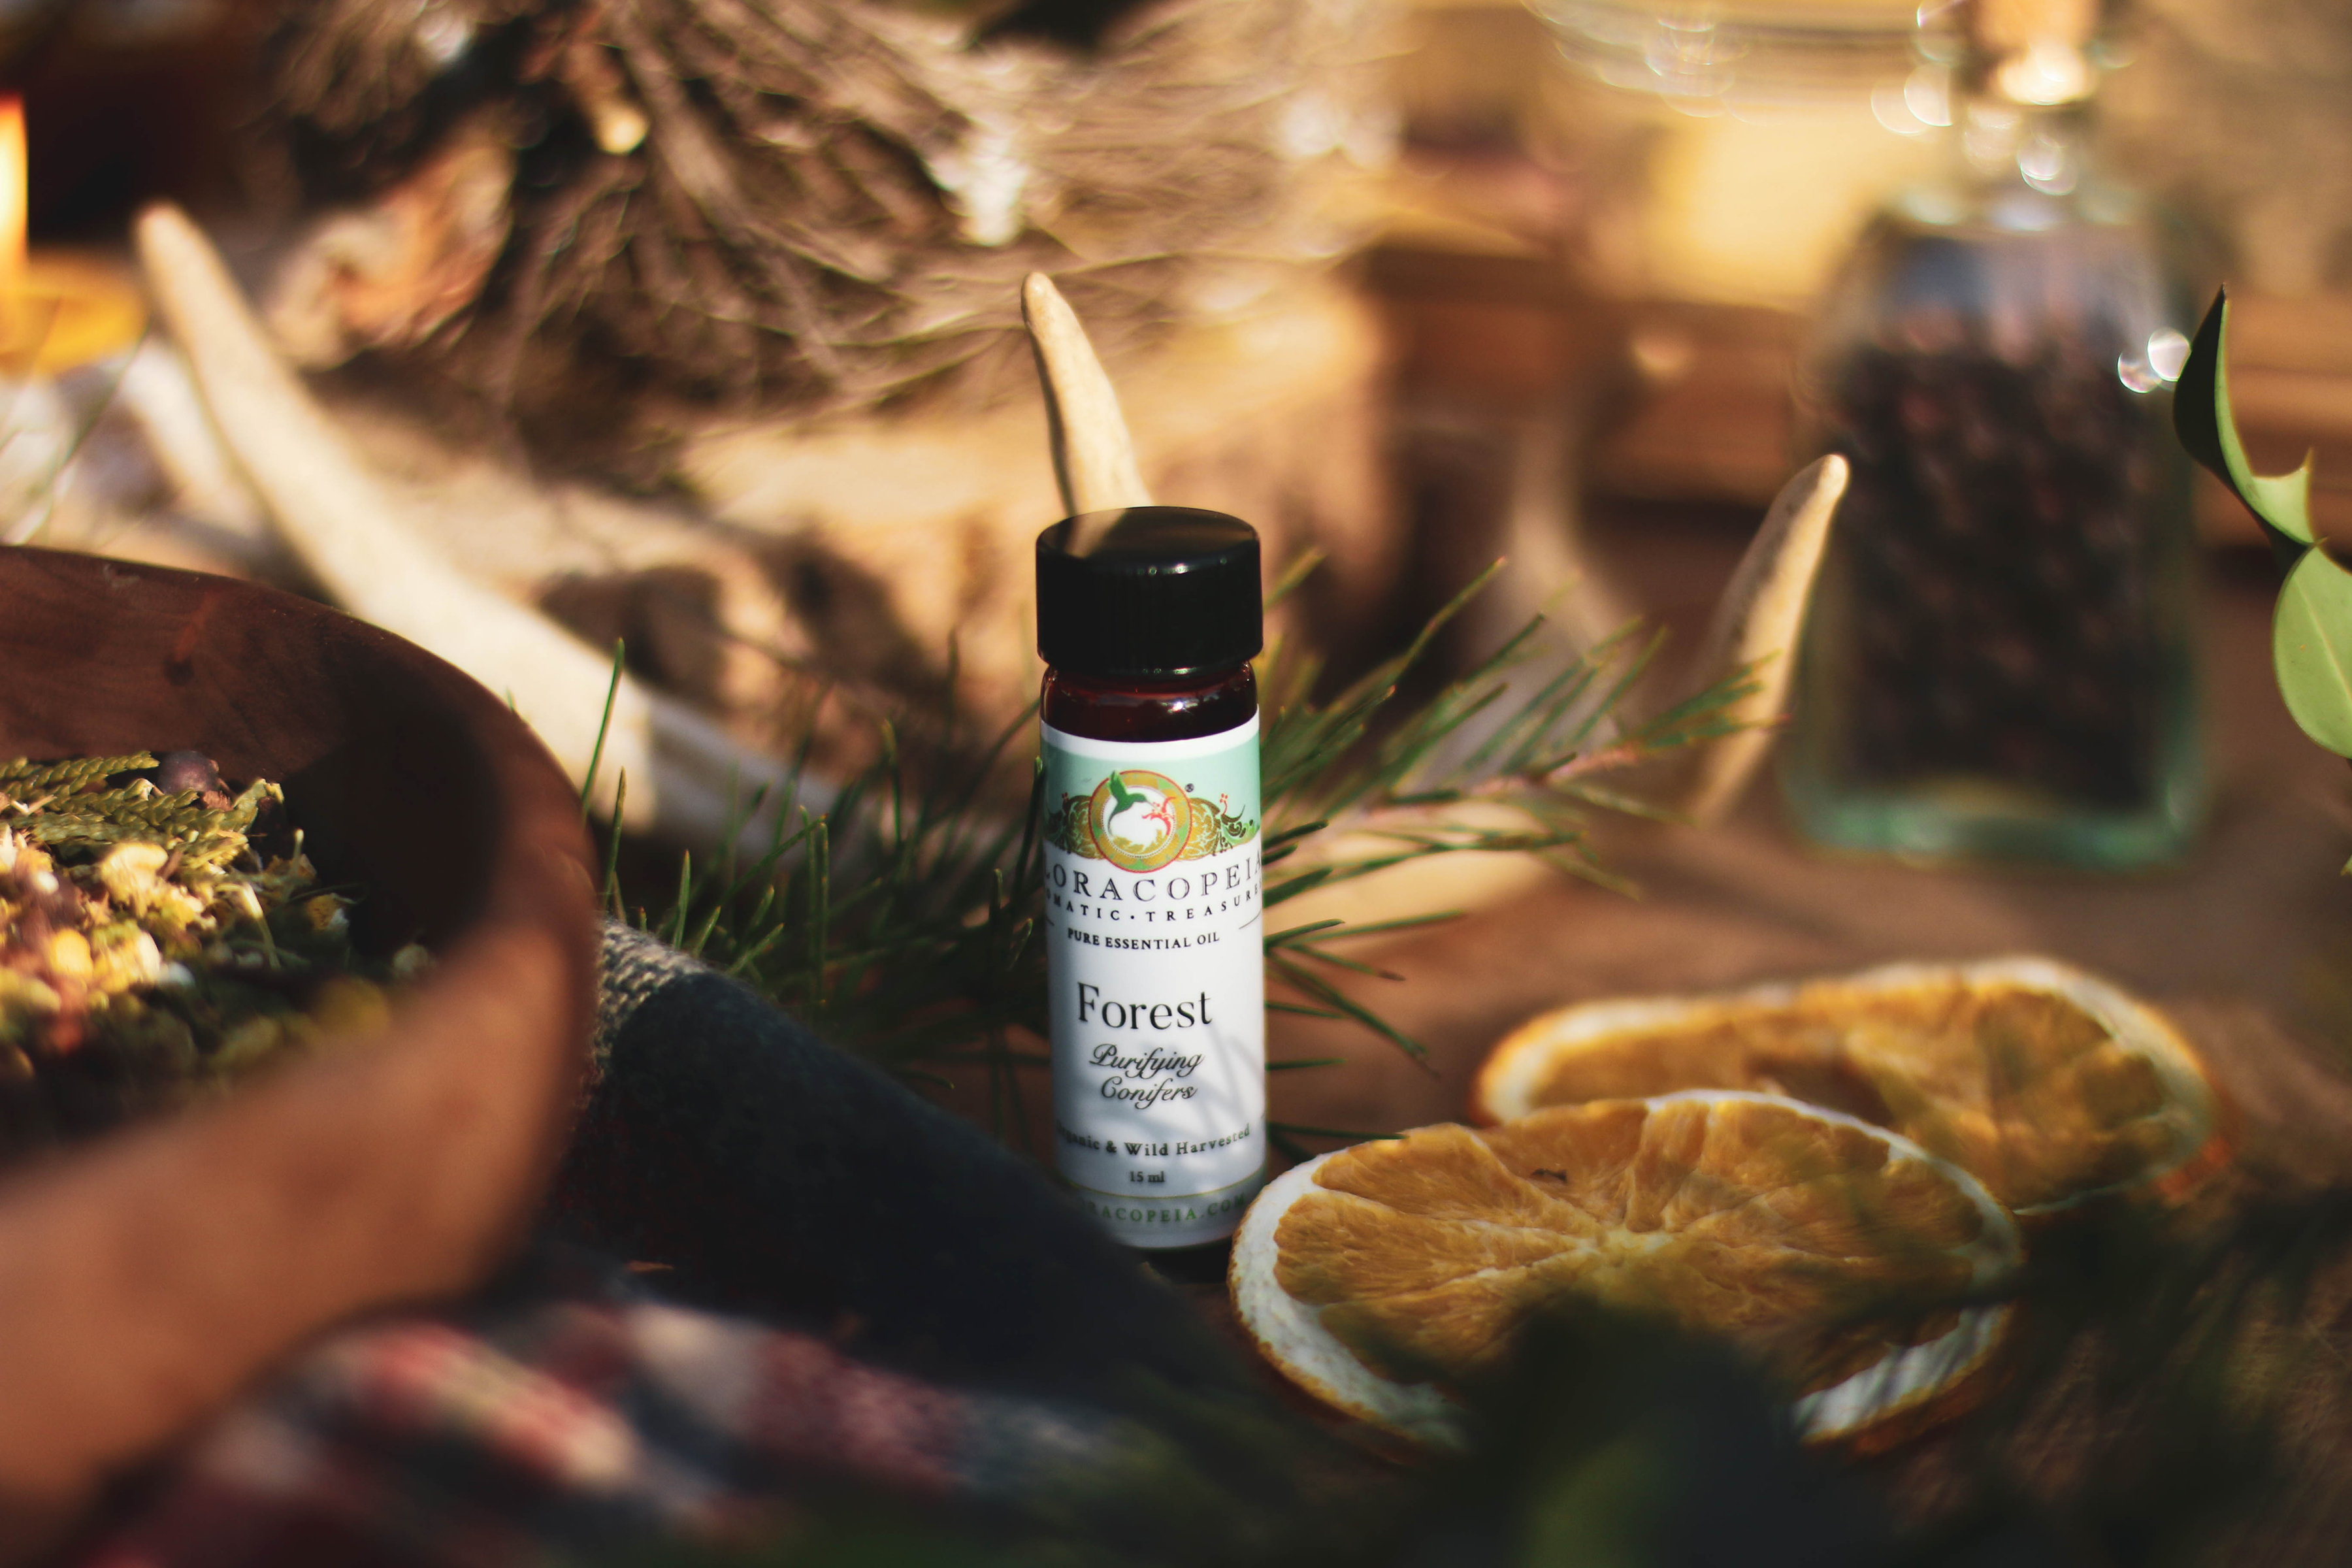 Forest-essential-oil-blend-bottle-on-table-with-winter-solstice-herbs-and-antlers